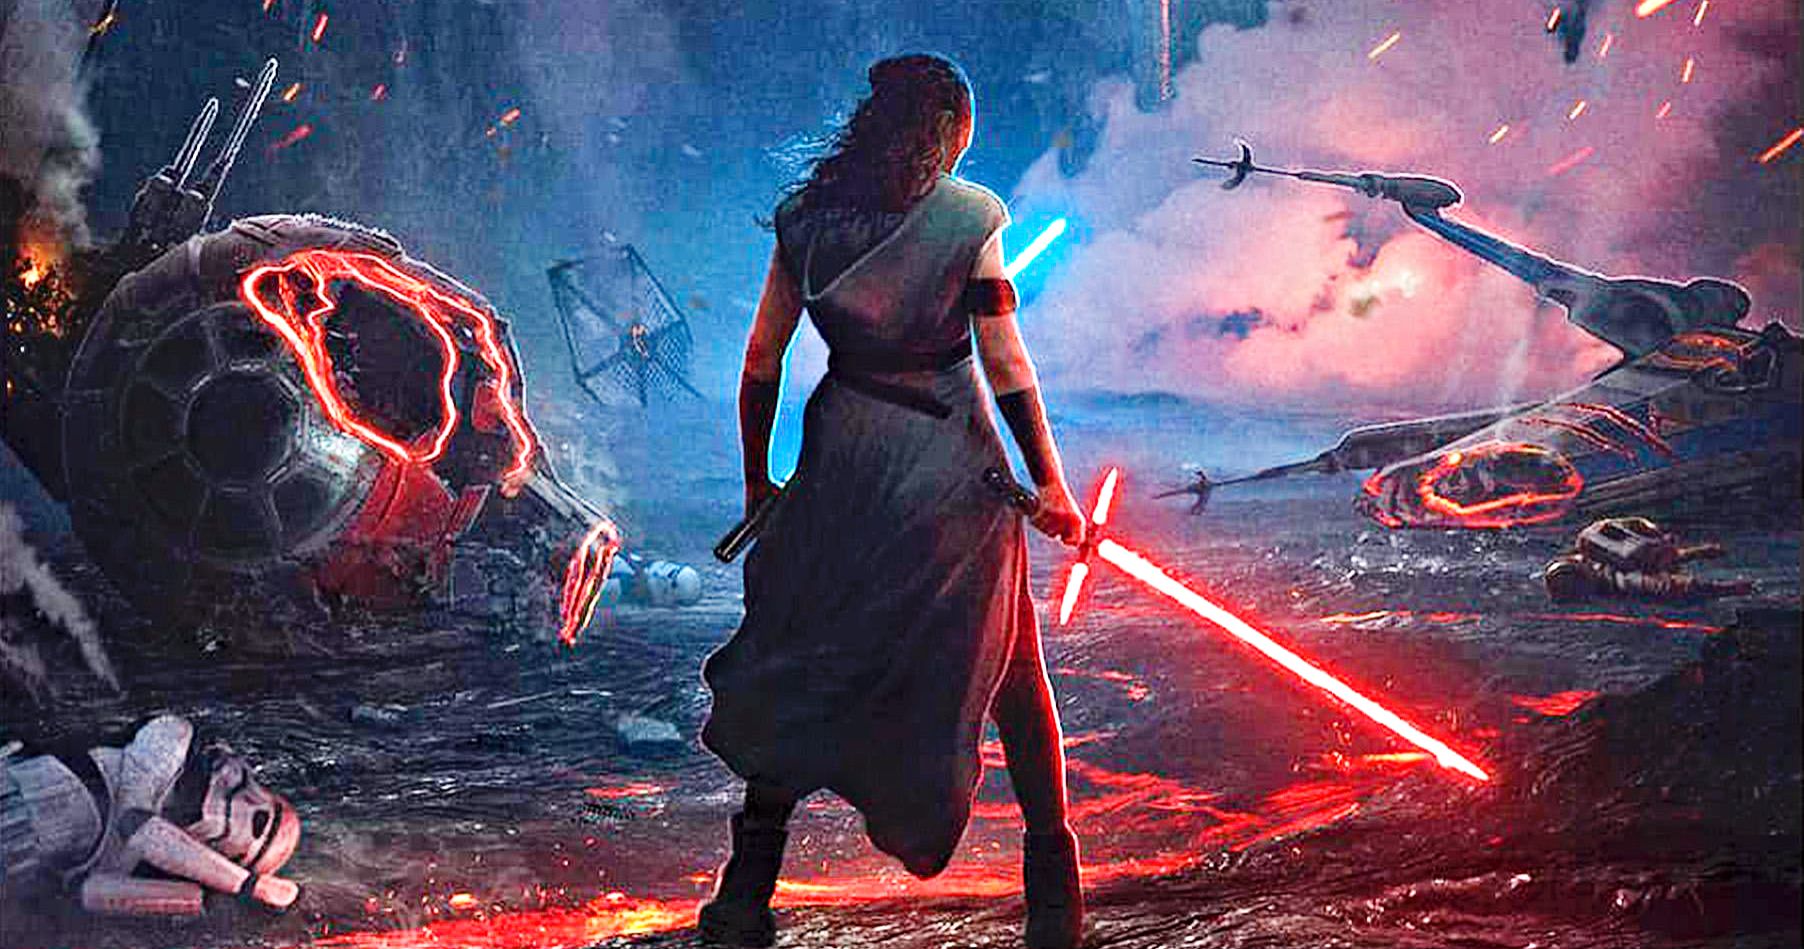 Rise of Skywalker Reshoots Are Underway, But Fans Shouldn't Worry